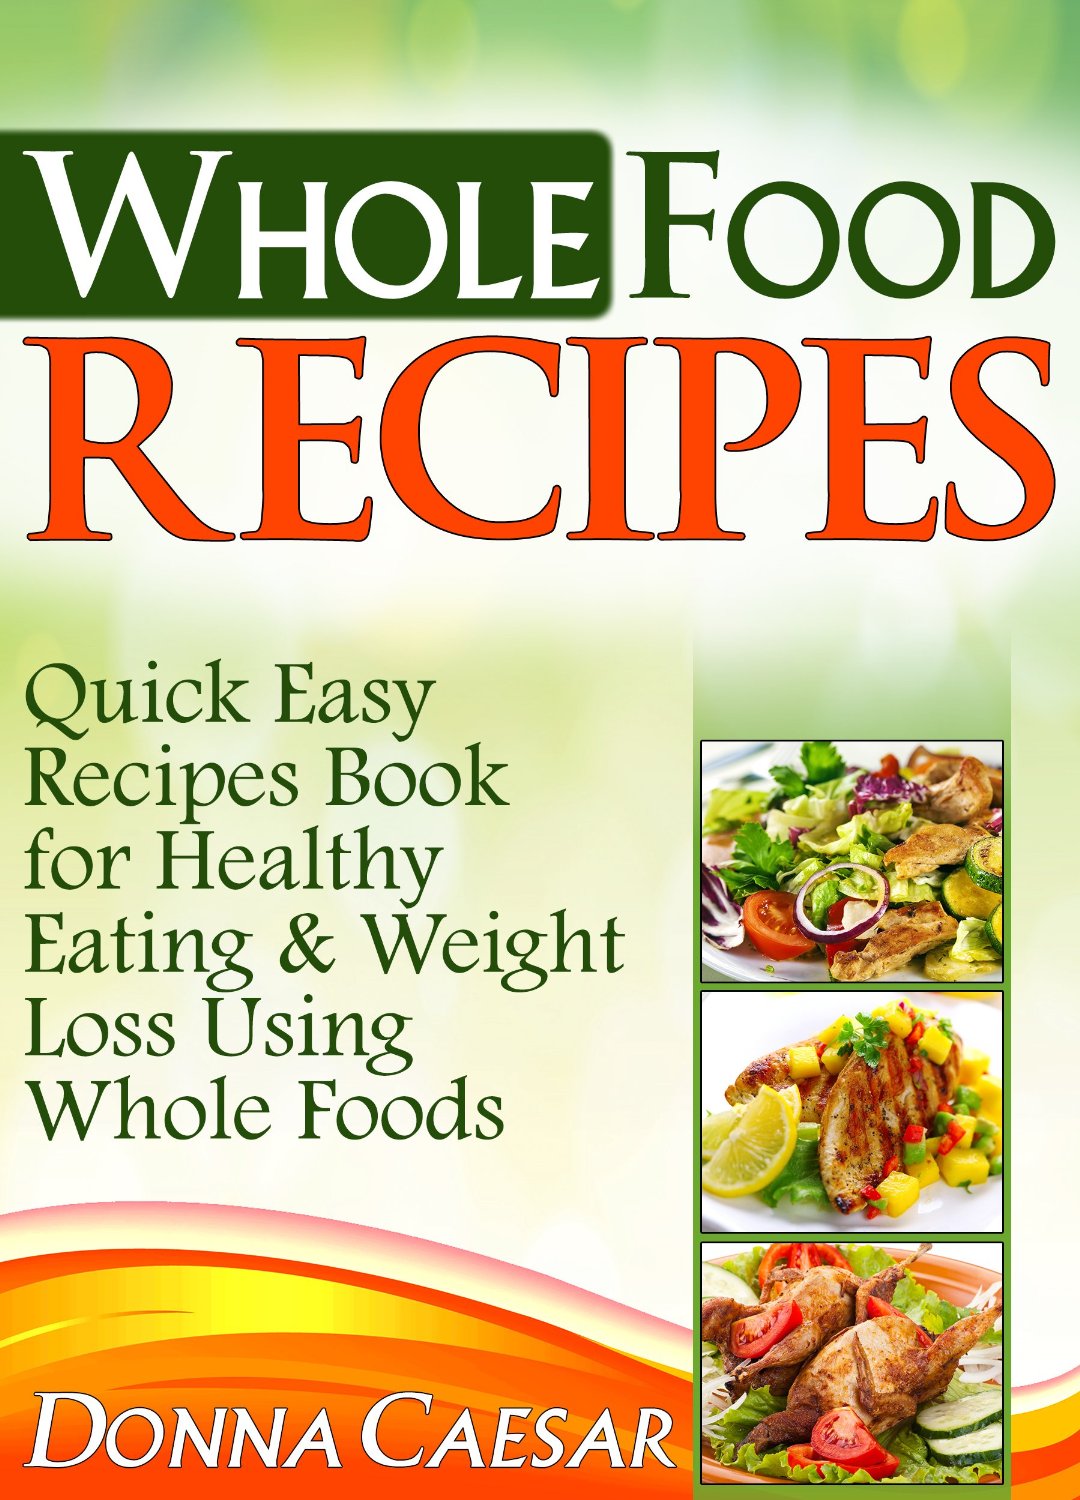 Whole Foods Recipes by Donna Caeser